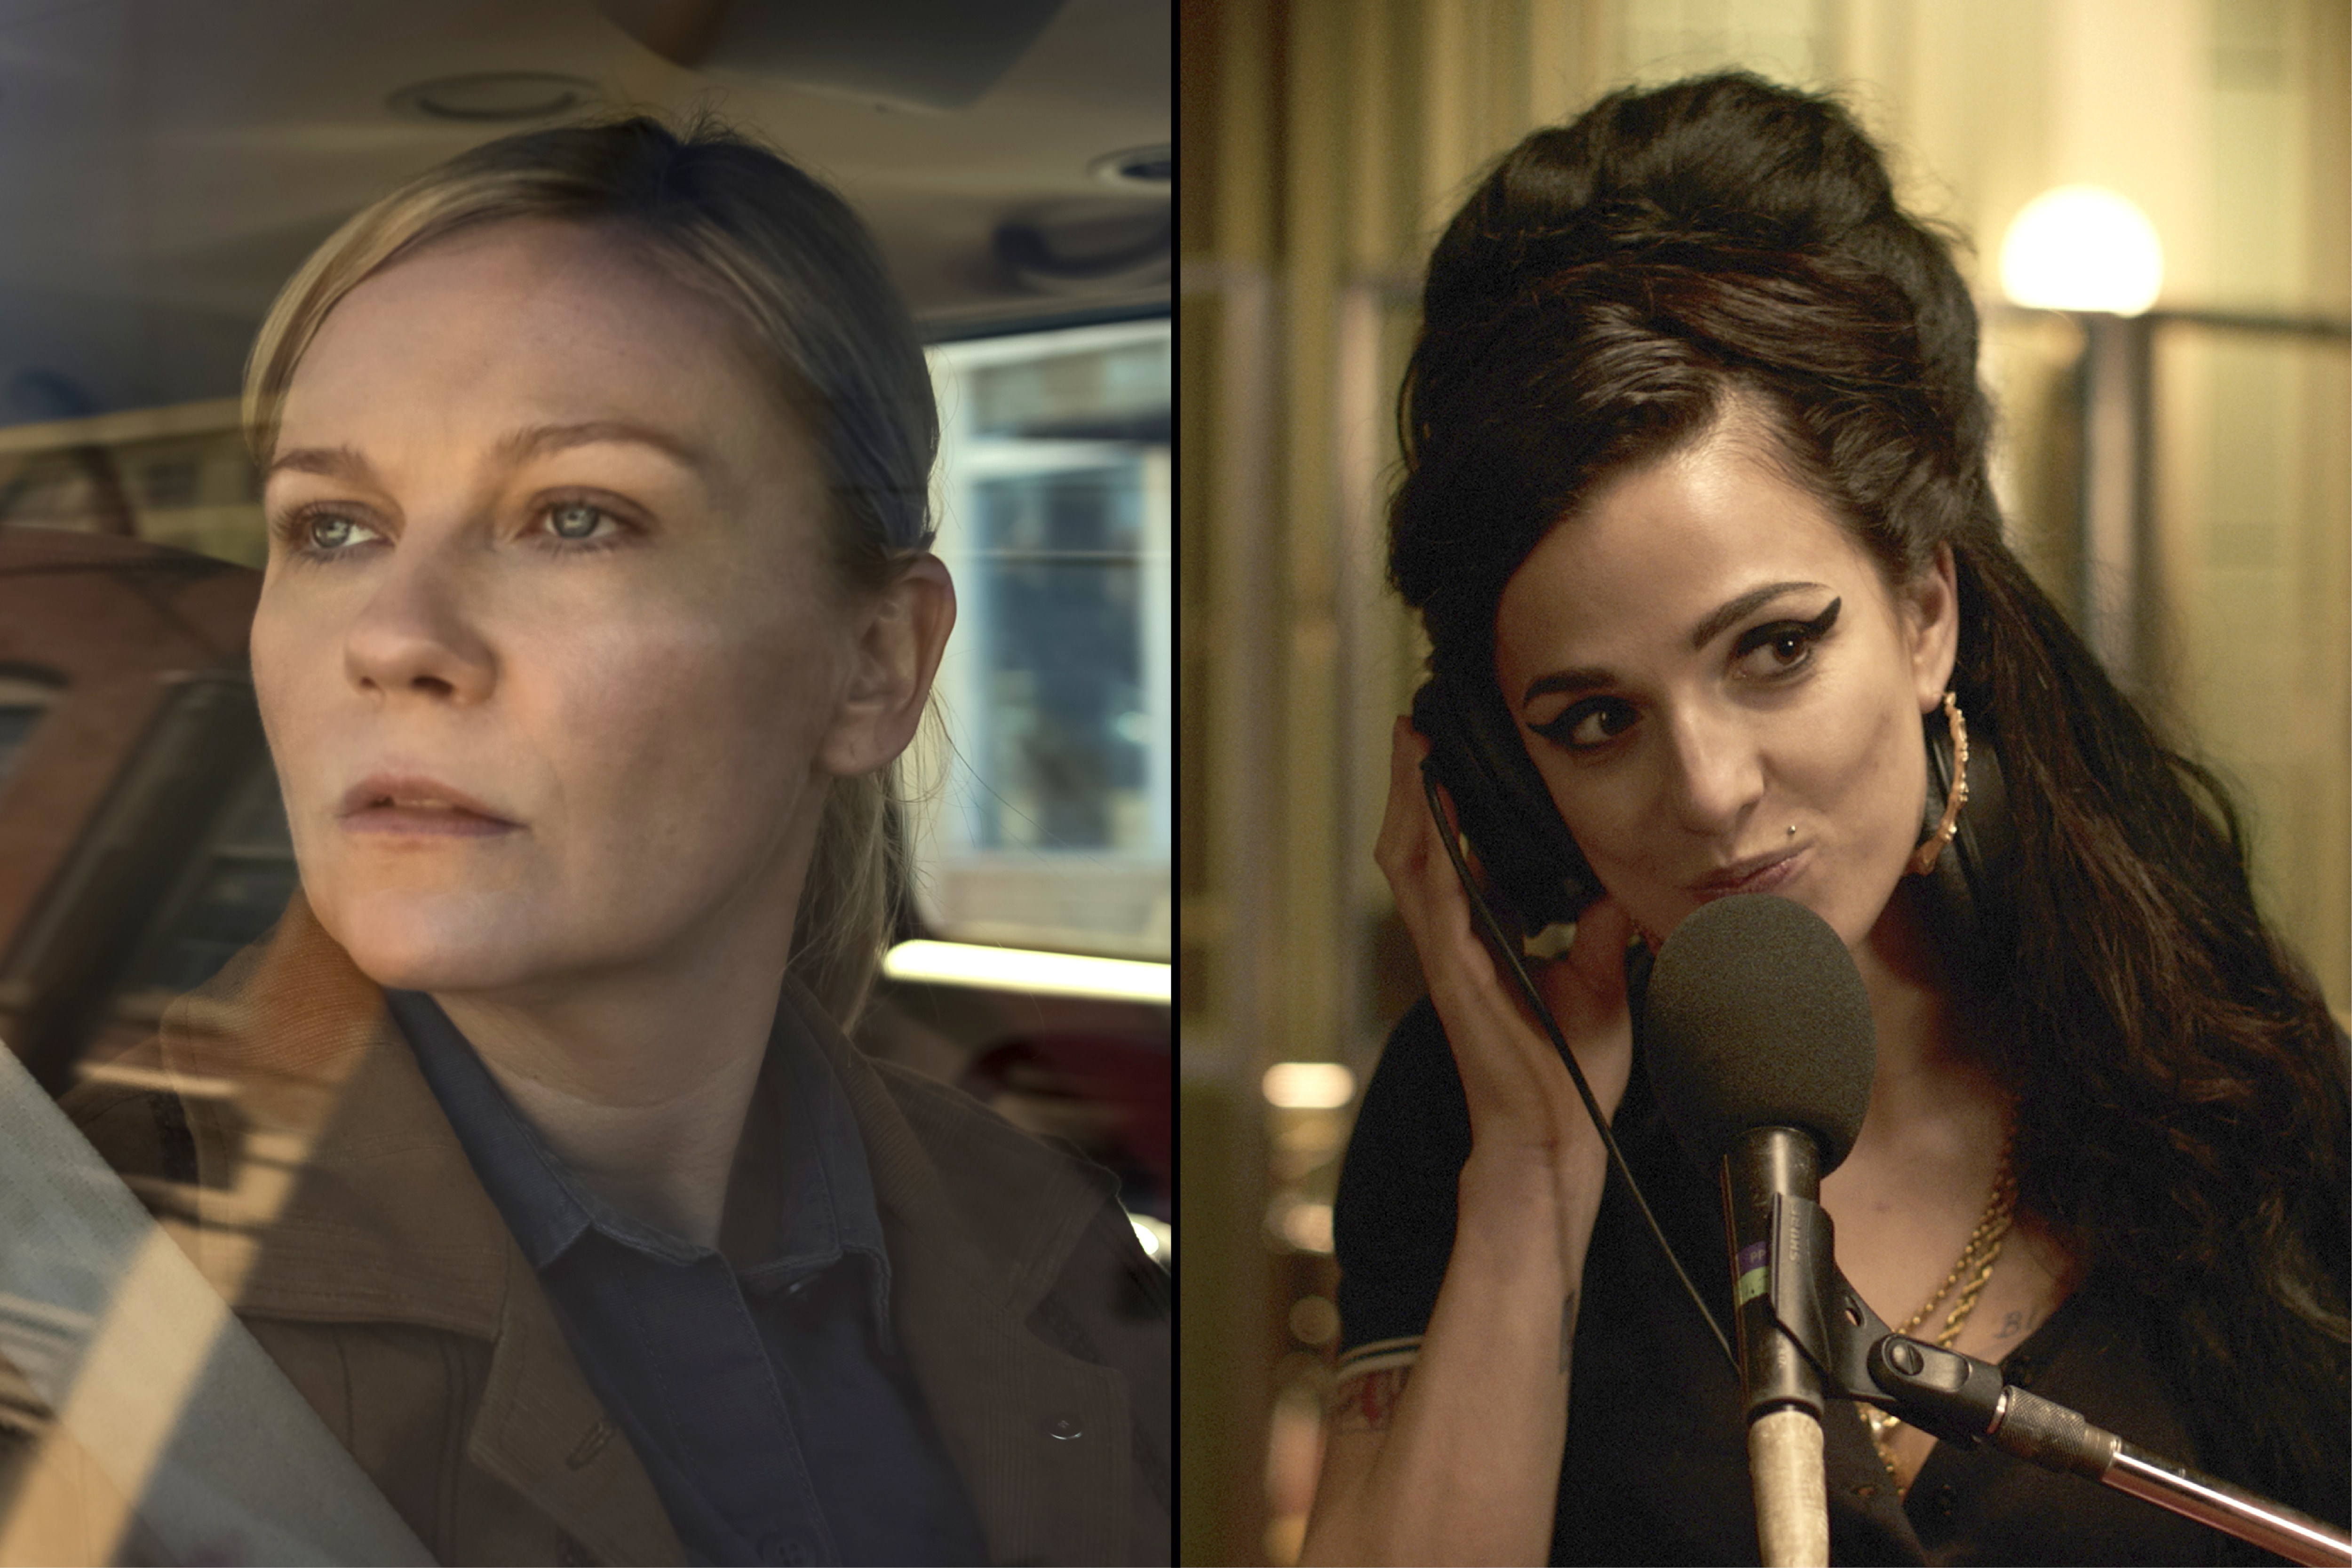 Left: Kirsten Dunst in Civil War. Right: Marisa Abela as Amy Winehouse in Back to Black